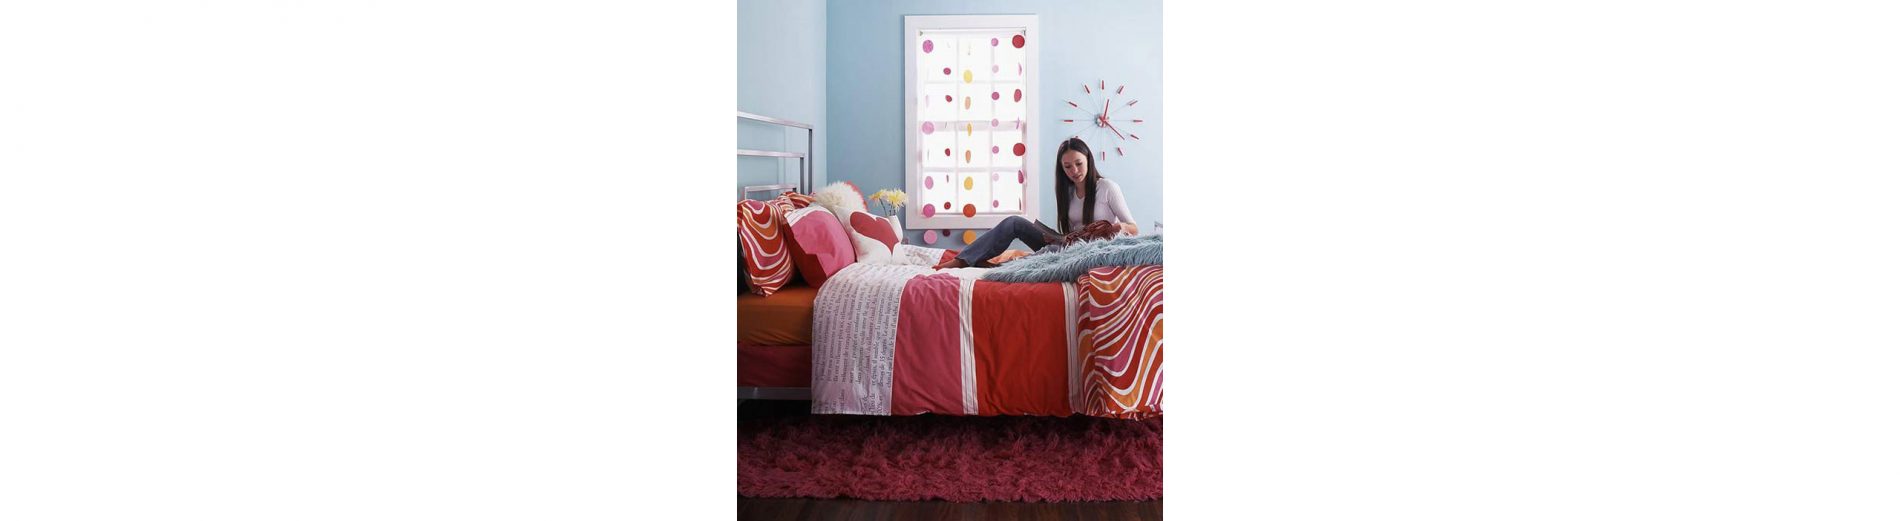 Impressive Bedroom Styles For Young Adults: 7 Ideas To Get Started